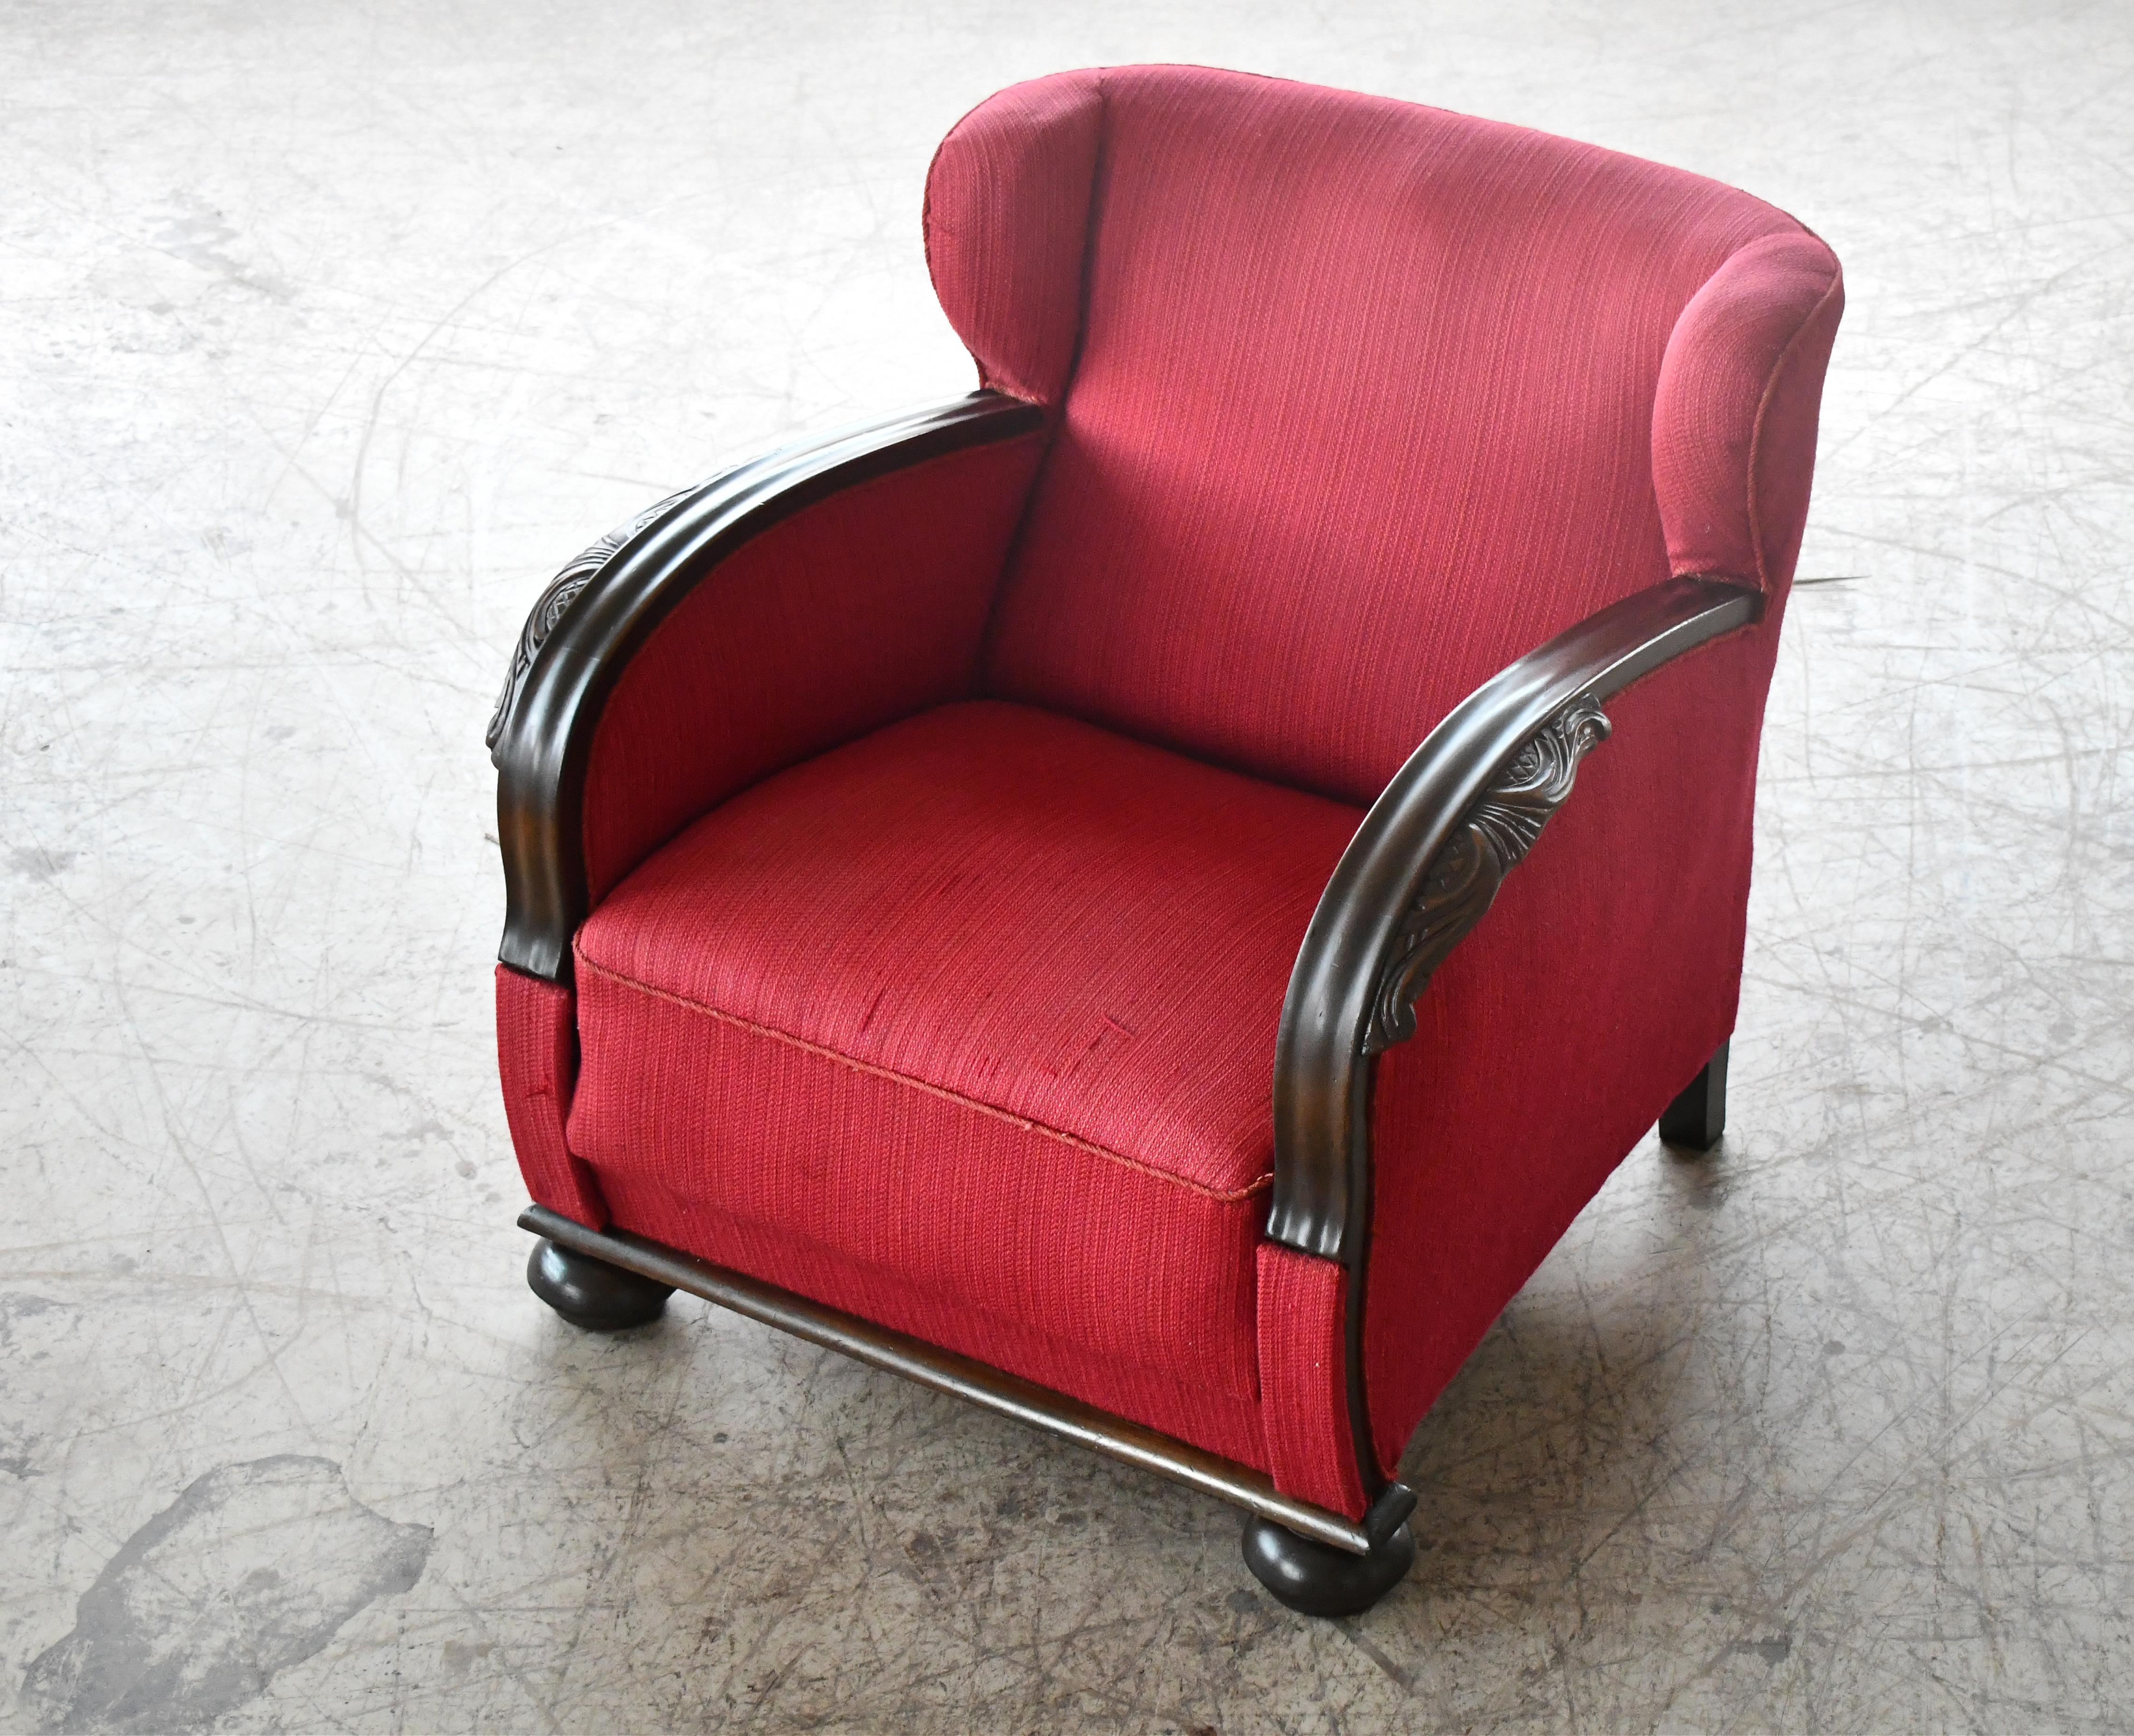 Mid-20th Century Danish 1930s Art Deco Lounge Chair in Red Mohair with Carved Armrests For Sale